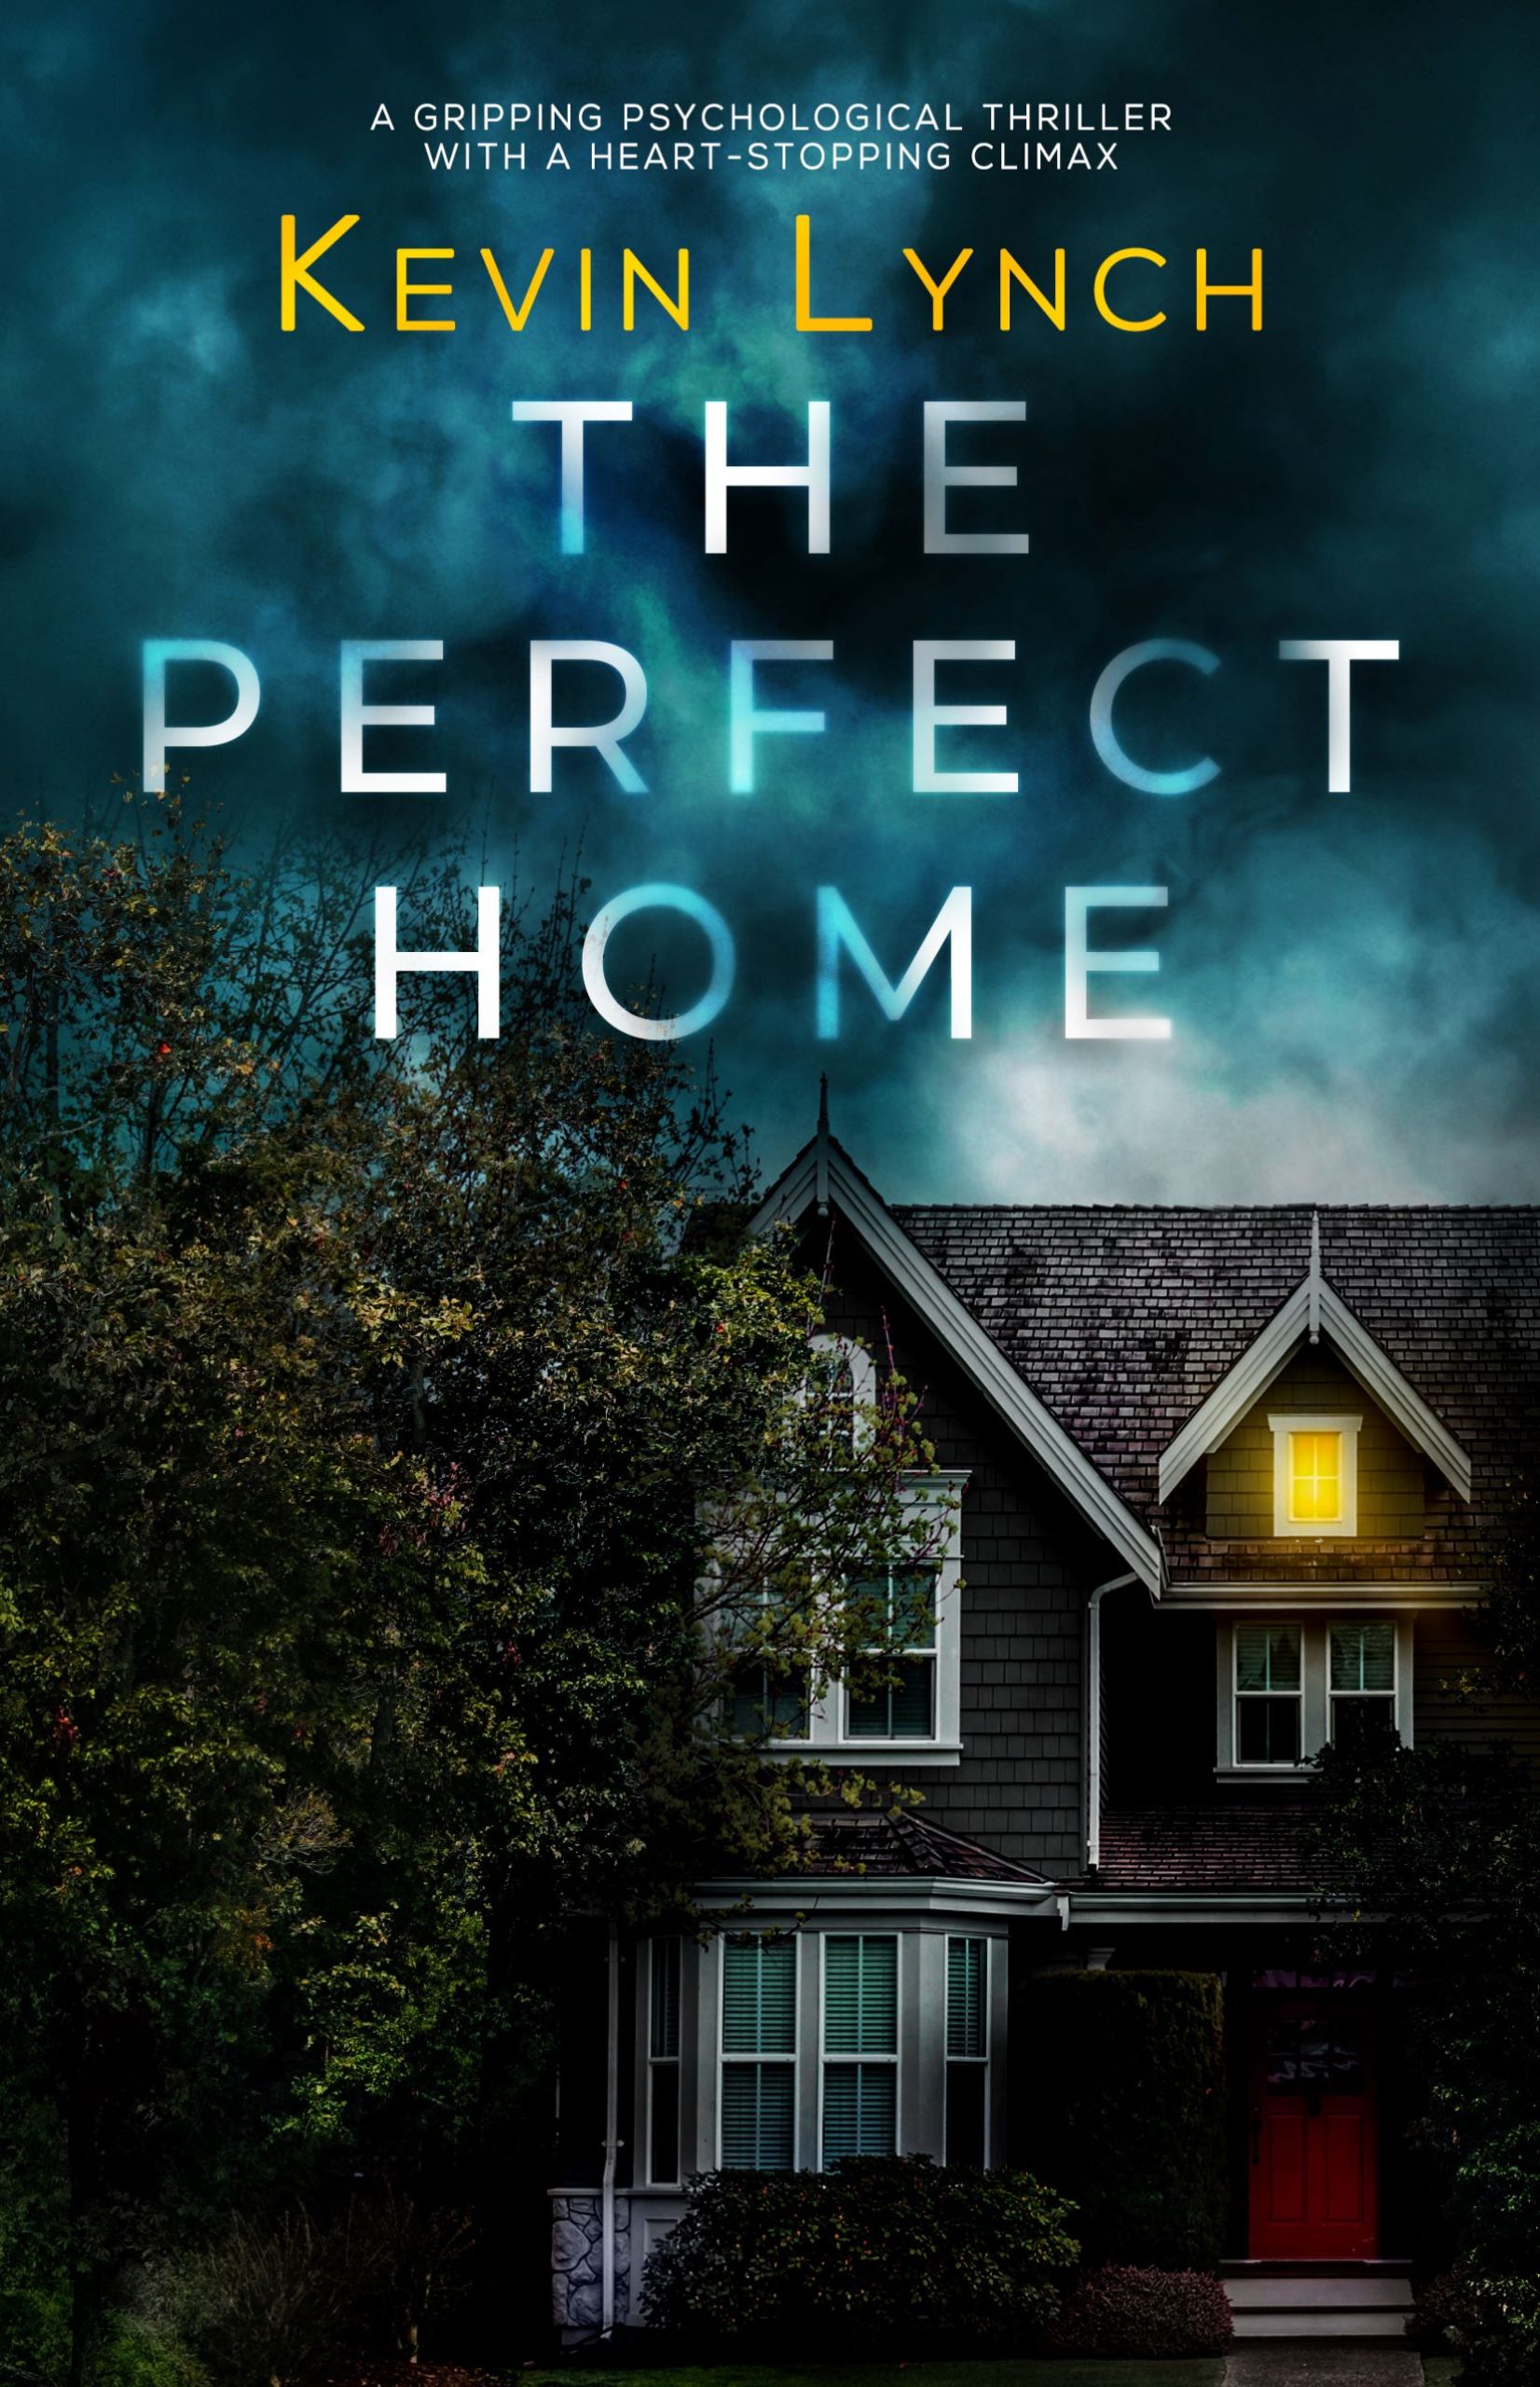 KEVIN LYNCH NEW RELEASE – THE PERFECT HOME